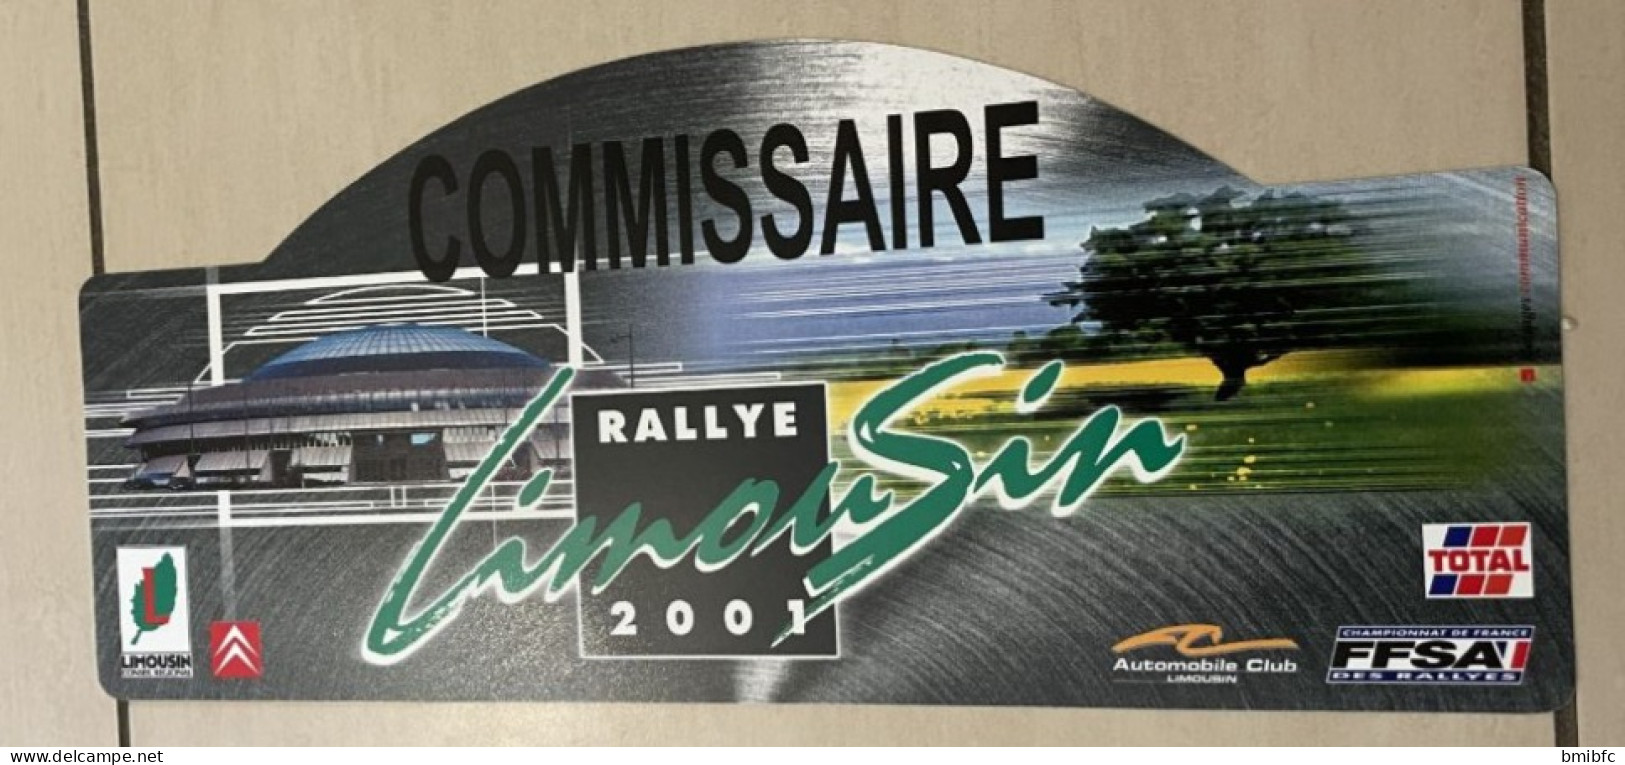 RALLYE LIMOUSIN 2001 - Rally-affiches